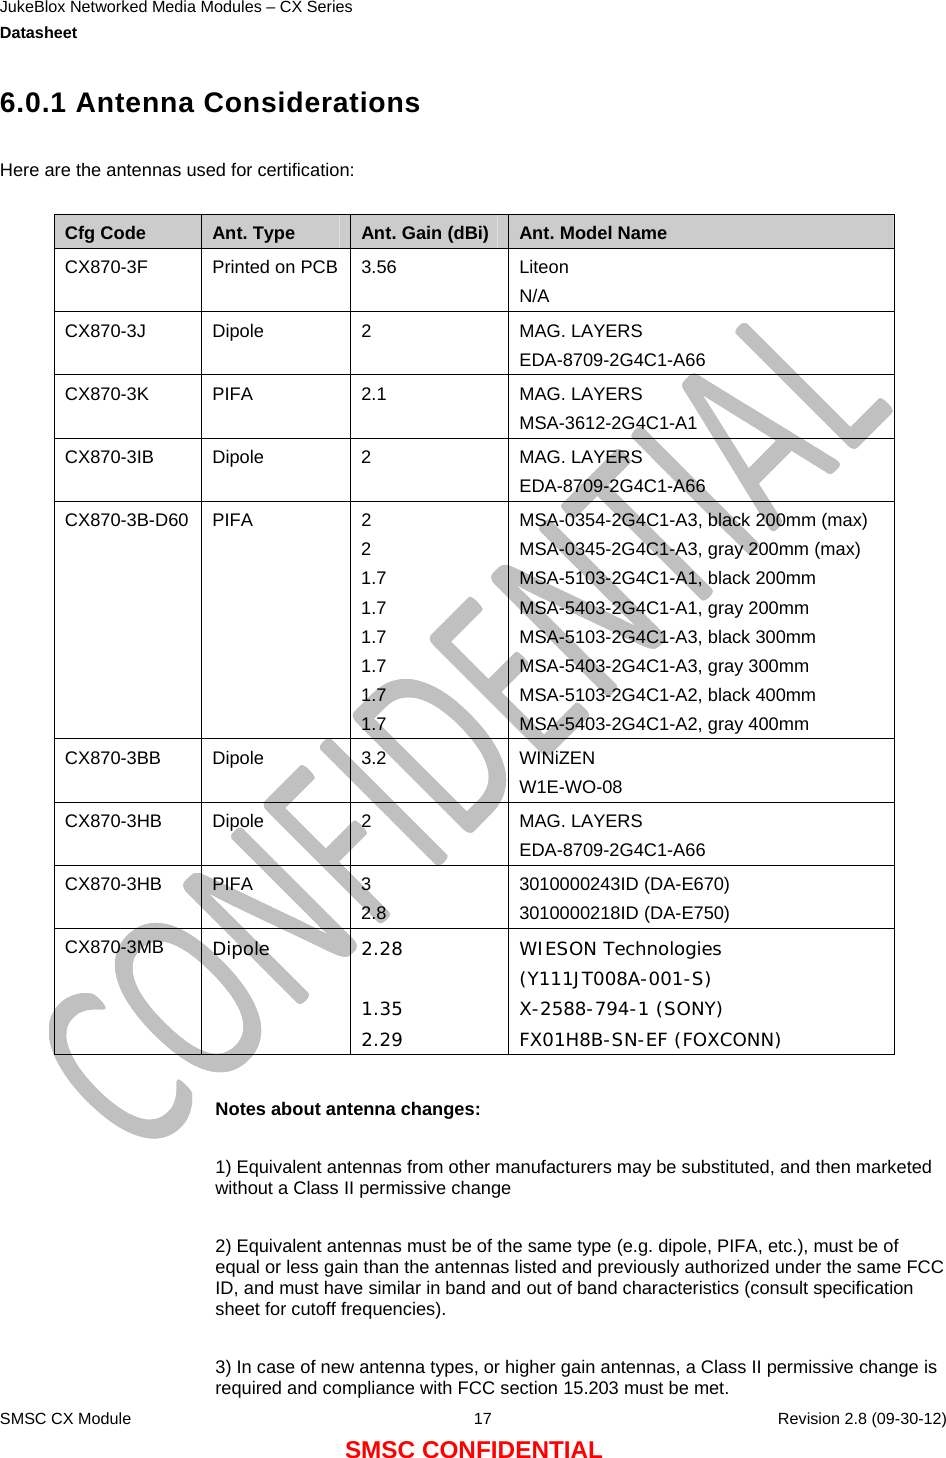 JukeBlox Networked Media Modules – CX Series  Datasheet    SMSC CX Module  17    Revision 2.8 (09-30-12) SMSC CONFIDENTIAL 6.0.1 Antenna Considerations  Here are the antennas used for certification:   Cfg Code  Ant. Type  Ant. Gain (dBi)  Ant. Model Name CX870-3F  Printed on PCB  3.56  Liteon N/A CX870-3J Dipole  2  MAG. LAYERS EDA-8709-2G4C1-A66 CX870-3K PIFA  2.1  MAG. LAYERS MSA-3612-2G4C1-A1 CX870-3IB Dipole  2  MAG. LAYERS EDA-8709-2G4C1-A66 CX870-3B-D60 PIFA  2 2 1.7 1.7 1.7 1.7 1.7 1.7 MSA-0354-2G4C1-A3, black 200mm (max) MSA-0345-2G4C1-A3, gray 200mm (max) MSA-5103-2G4C1-A1, black 200mm MSA-5403-2G4C1-A1, gray 200mm MSA-5103-2G4C1-A3, black 300mm MSA-5403-2G4C1-A3, gray 300mm MSA-5103-2G4C1-A2, black 400mm MSA-5403-2G4C1-A2, gray 400mm CX870-3BB Dipole  3.2  WINiZEN W1E-WO-08 CX870-3HB Dipole  2  MAG. LAYERS EDA-8709-2G4C1-A66 CX870-3HB PIFA  3 2.8 3010000243ID (DA-E670) 3010000218ID (DA-E750) CX870-3MB  Dipole 2.28  1.35 2.29 WIESON Technologies (Y111JT008A-001-S) X-2588-794-1 (SONY) FX01H8B-SN-EF (FOXCONN)  Notes about antenna changes:   1) Equivalent antennas from other manufacturers may be substituted, and then marketed without a Class II permissive change  2) Equivalent antennas must be of the same type (e.g. dipole, PIFA, etc.), must be of equal or less gain than the antennas listed and previously authorized under the same FCC ID, and must have similar in band and out of band characteristics (consult specification sheet for cutoff frequencies).  3) In case of new antenna types, or higher gain antennas, a Class II permissive change is required and compliance with FCC section 15.203 must be met. 